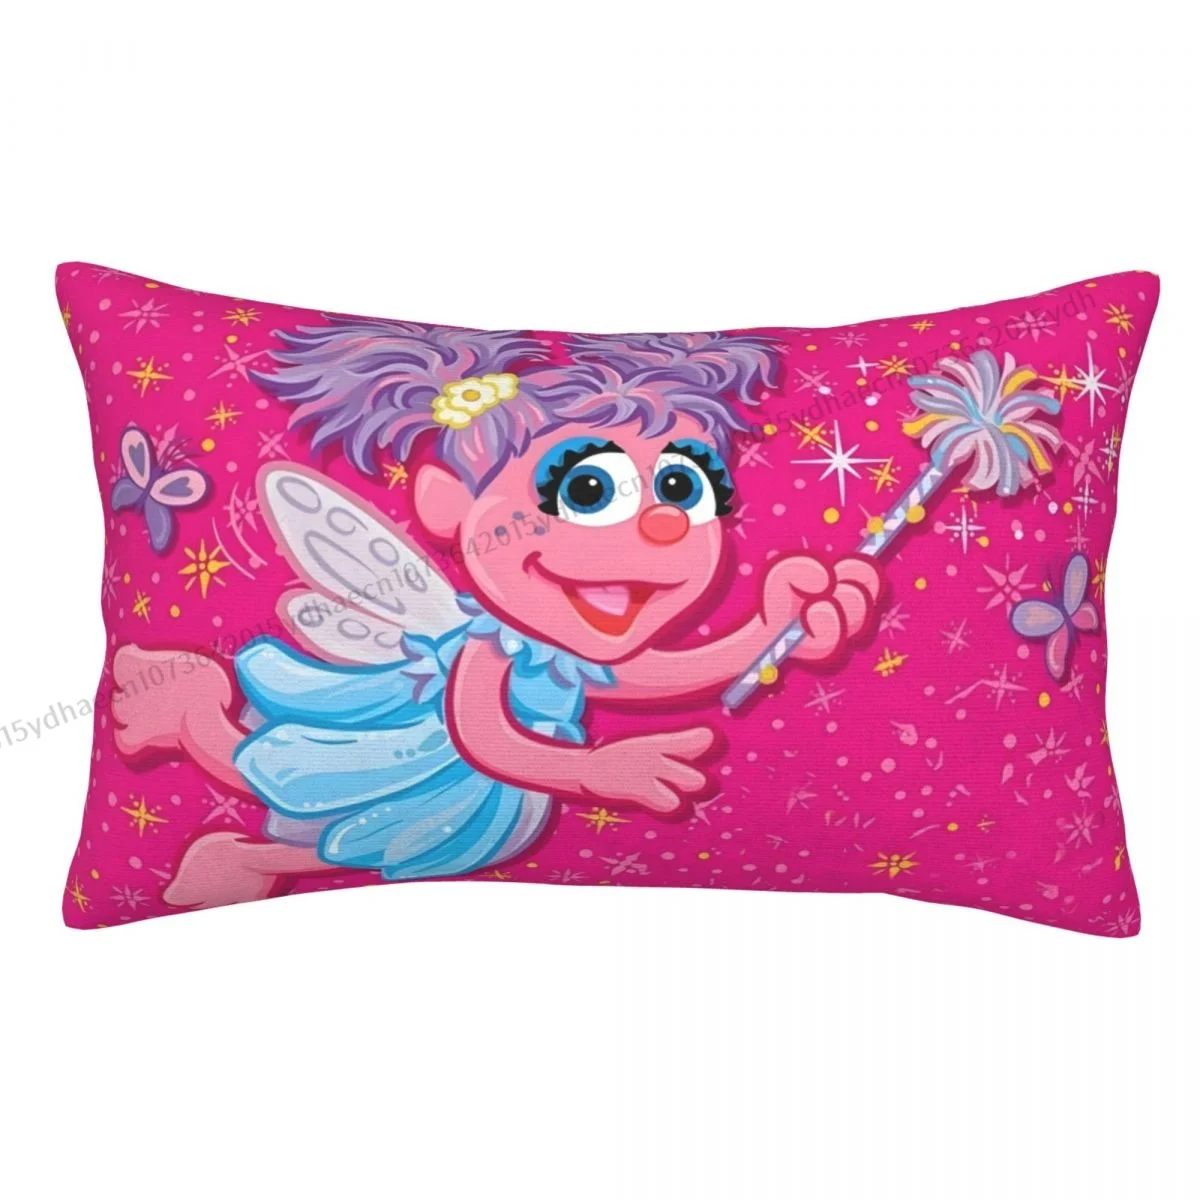 

Abby Cadabby Printed Pillow Case Sesame Street Doll Cartoon Backpack Cojines Covers Breathable Home Decor Pillowcase